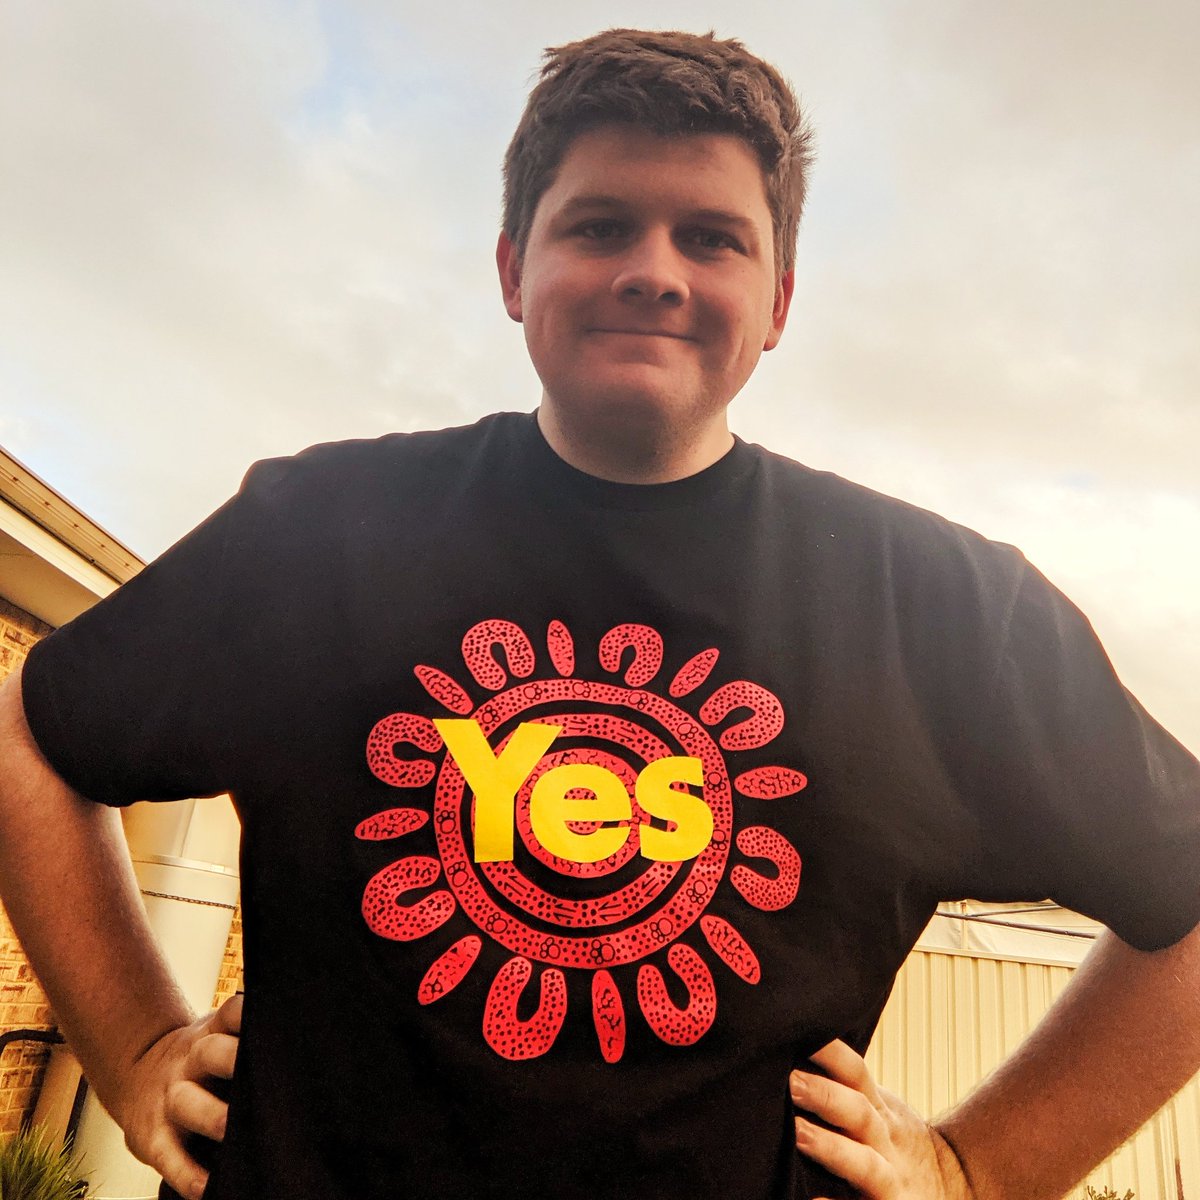 I'm voting yes because I have so much love for Australia and so much optimism for the future we can build together, one that celebrates the oldest living cultures on earth as a core part of our national identity.

We have nothing to lose and everything to gain. #YES #yes23